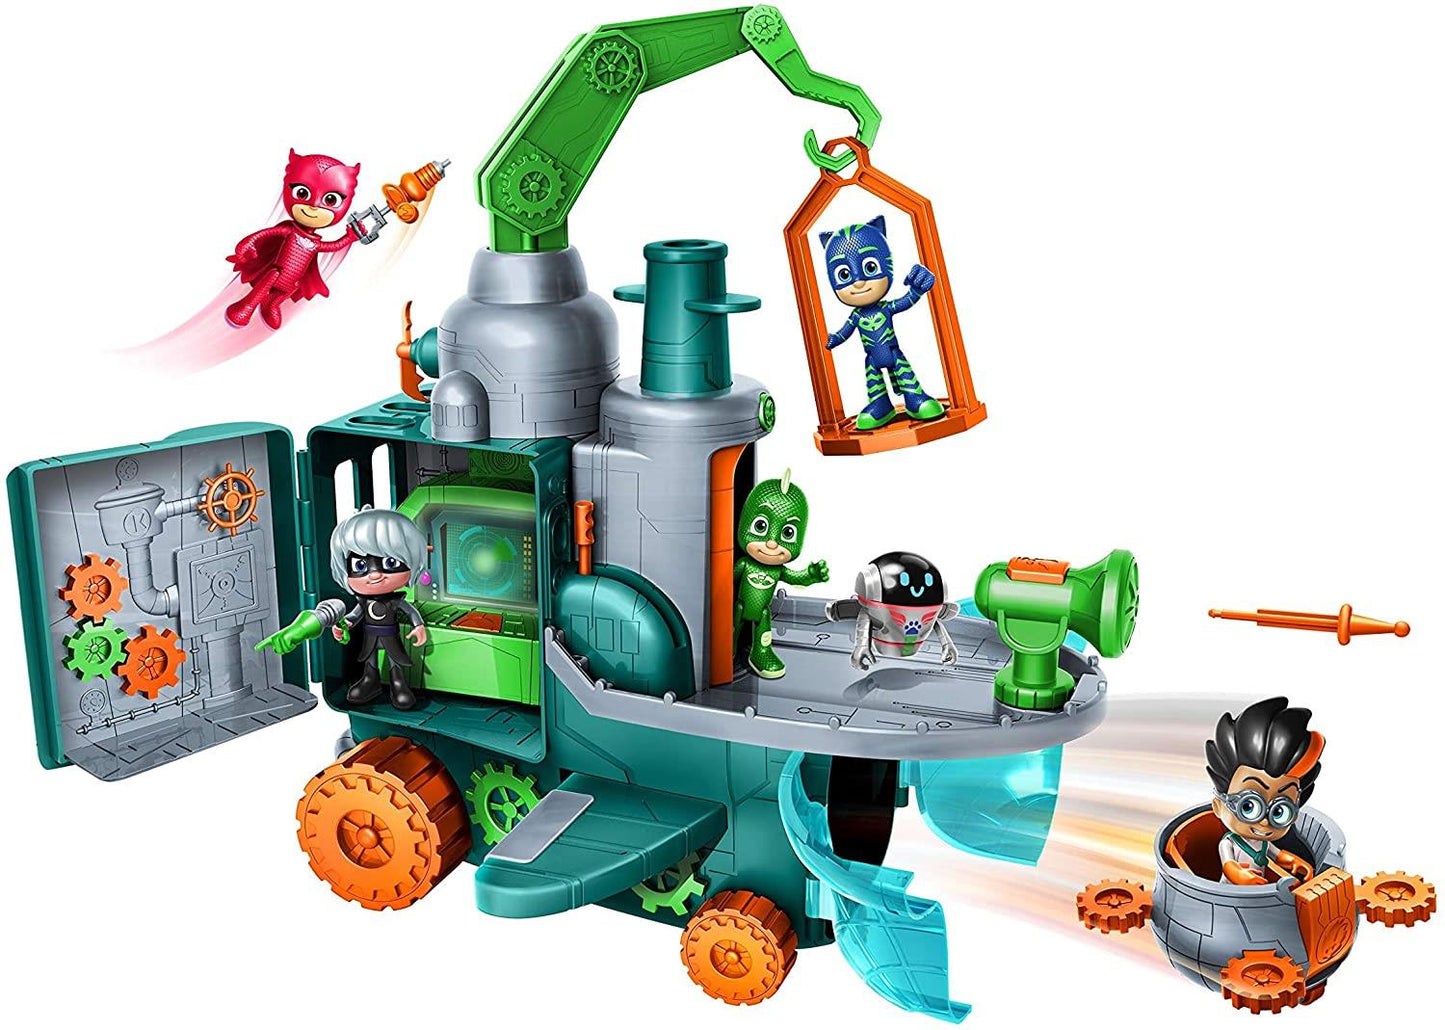 PJ Masks Romeo's Flying Factory Playset 95780 Jouet Save the Sky